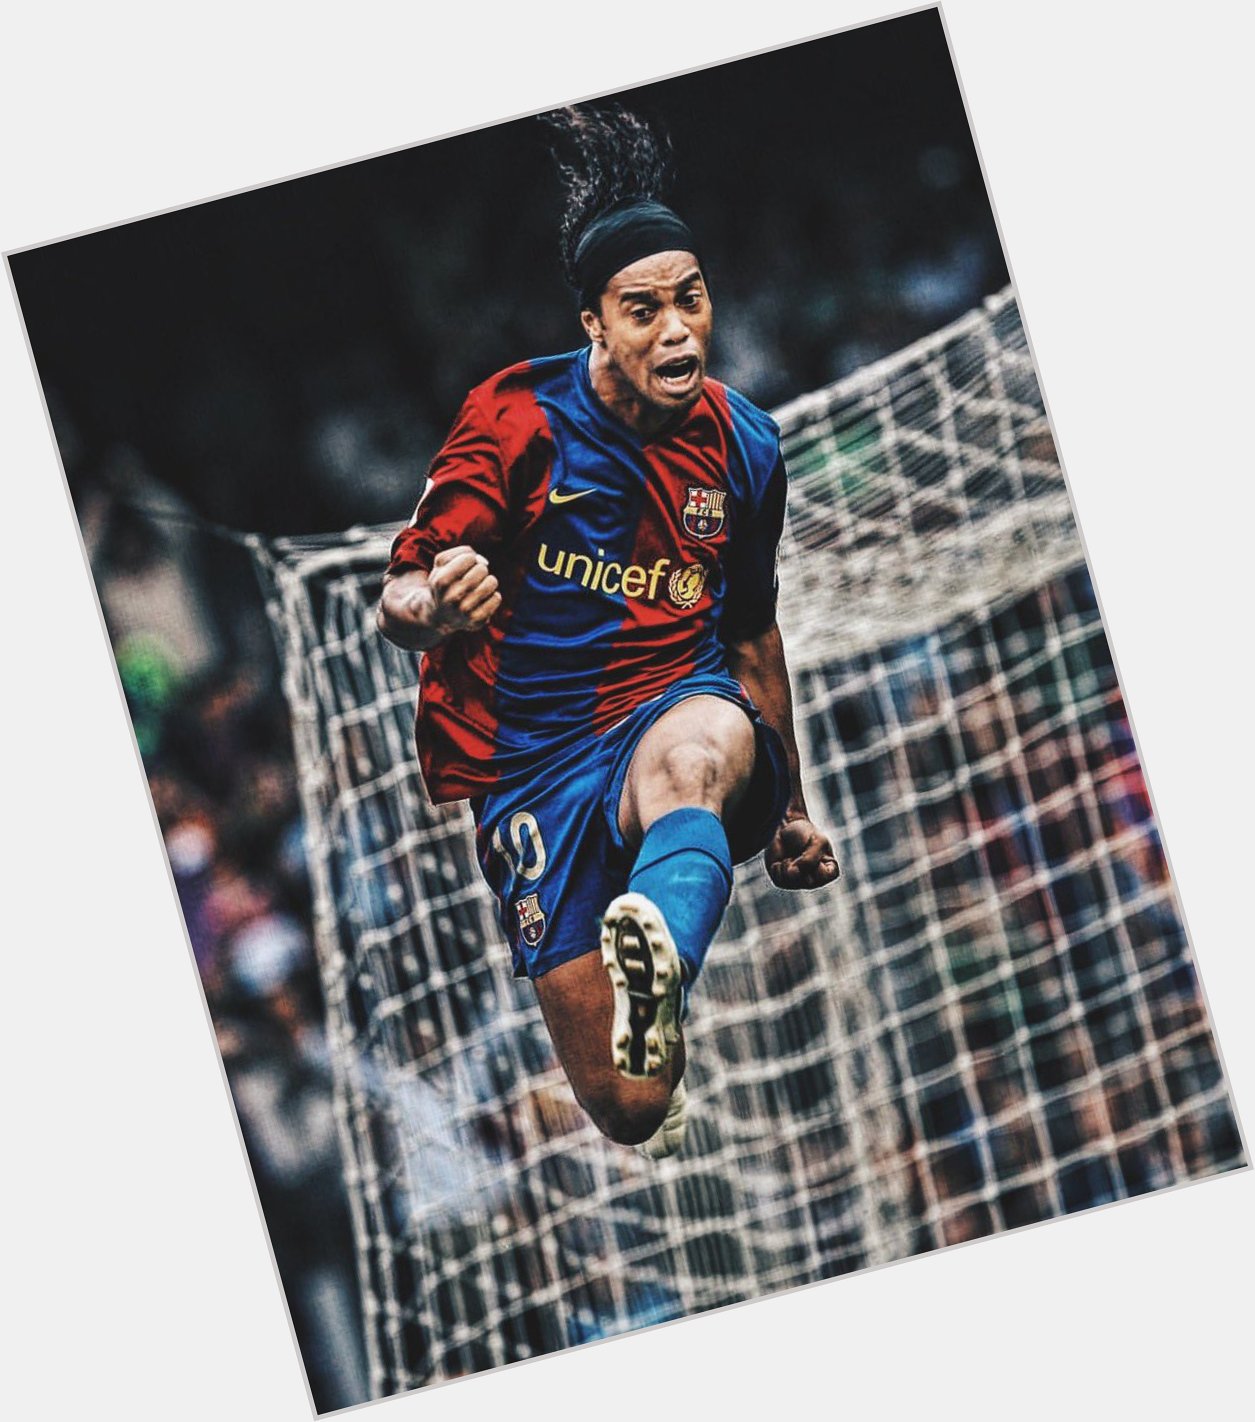 Happy birthday, Ronaldinho Gaucho.
Made thousands fall in love with the game. The GOAT of the streets. 